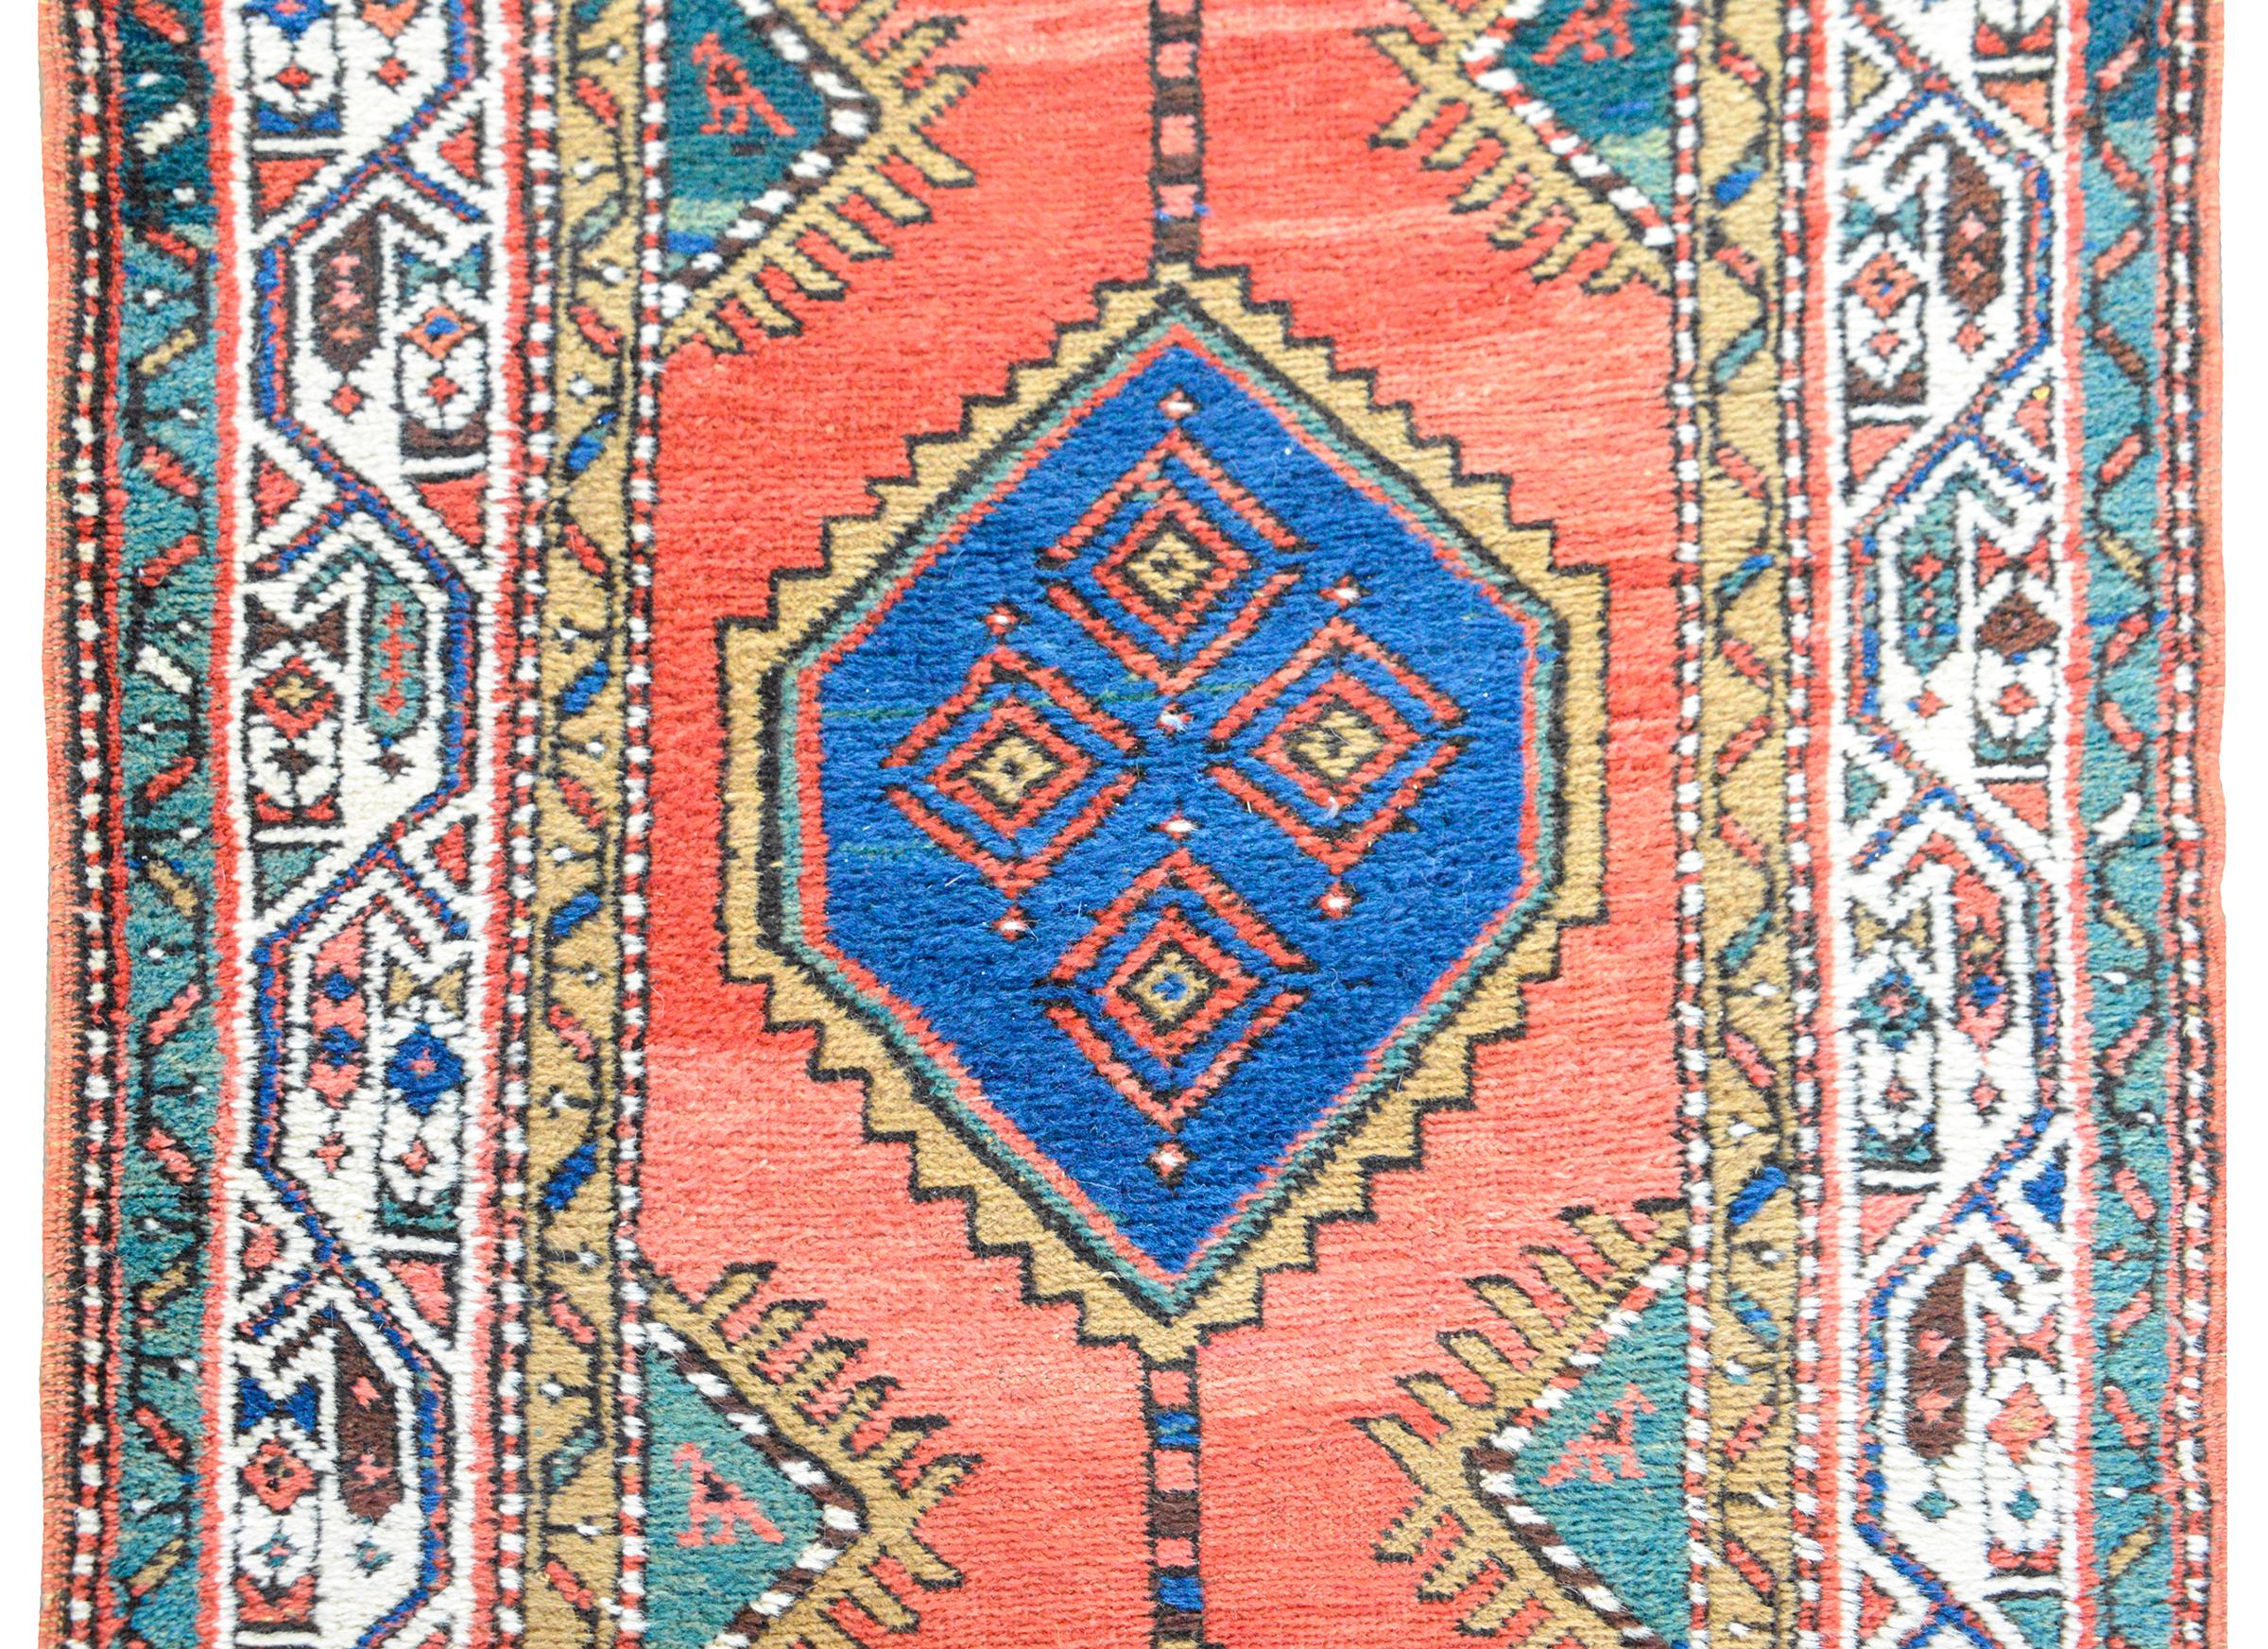 A beautiful and striking early 20th century Persian Serab runner with several indigo diamond medallions each with stylized geometric flowers in the center, and living against a crimson background. The border is wonderful with a stylized scrolling